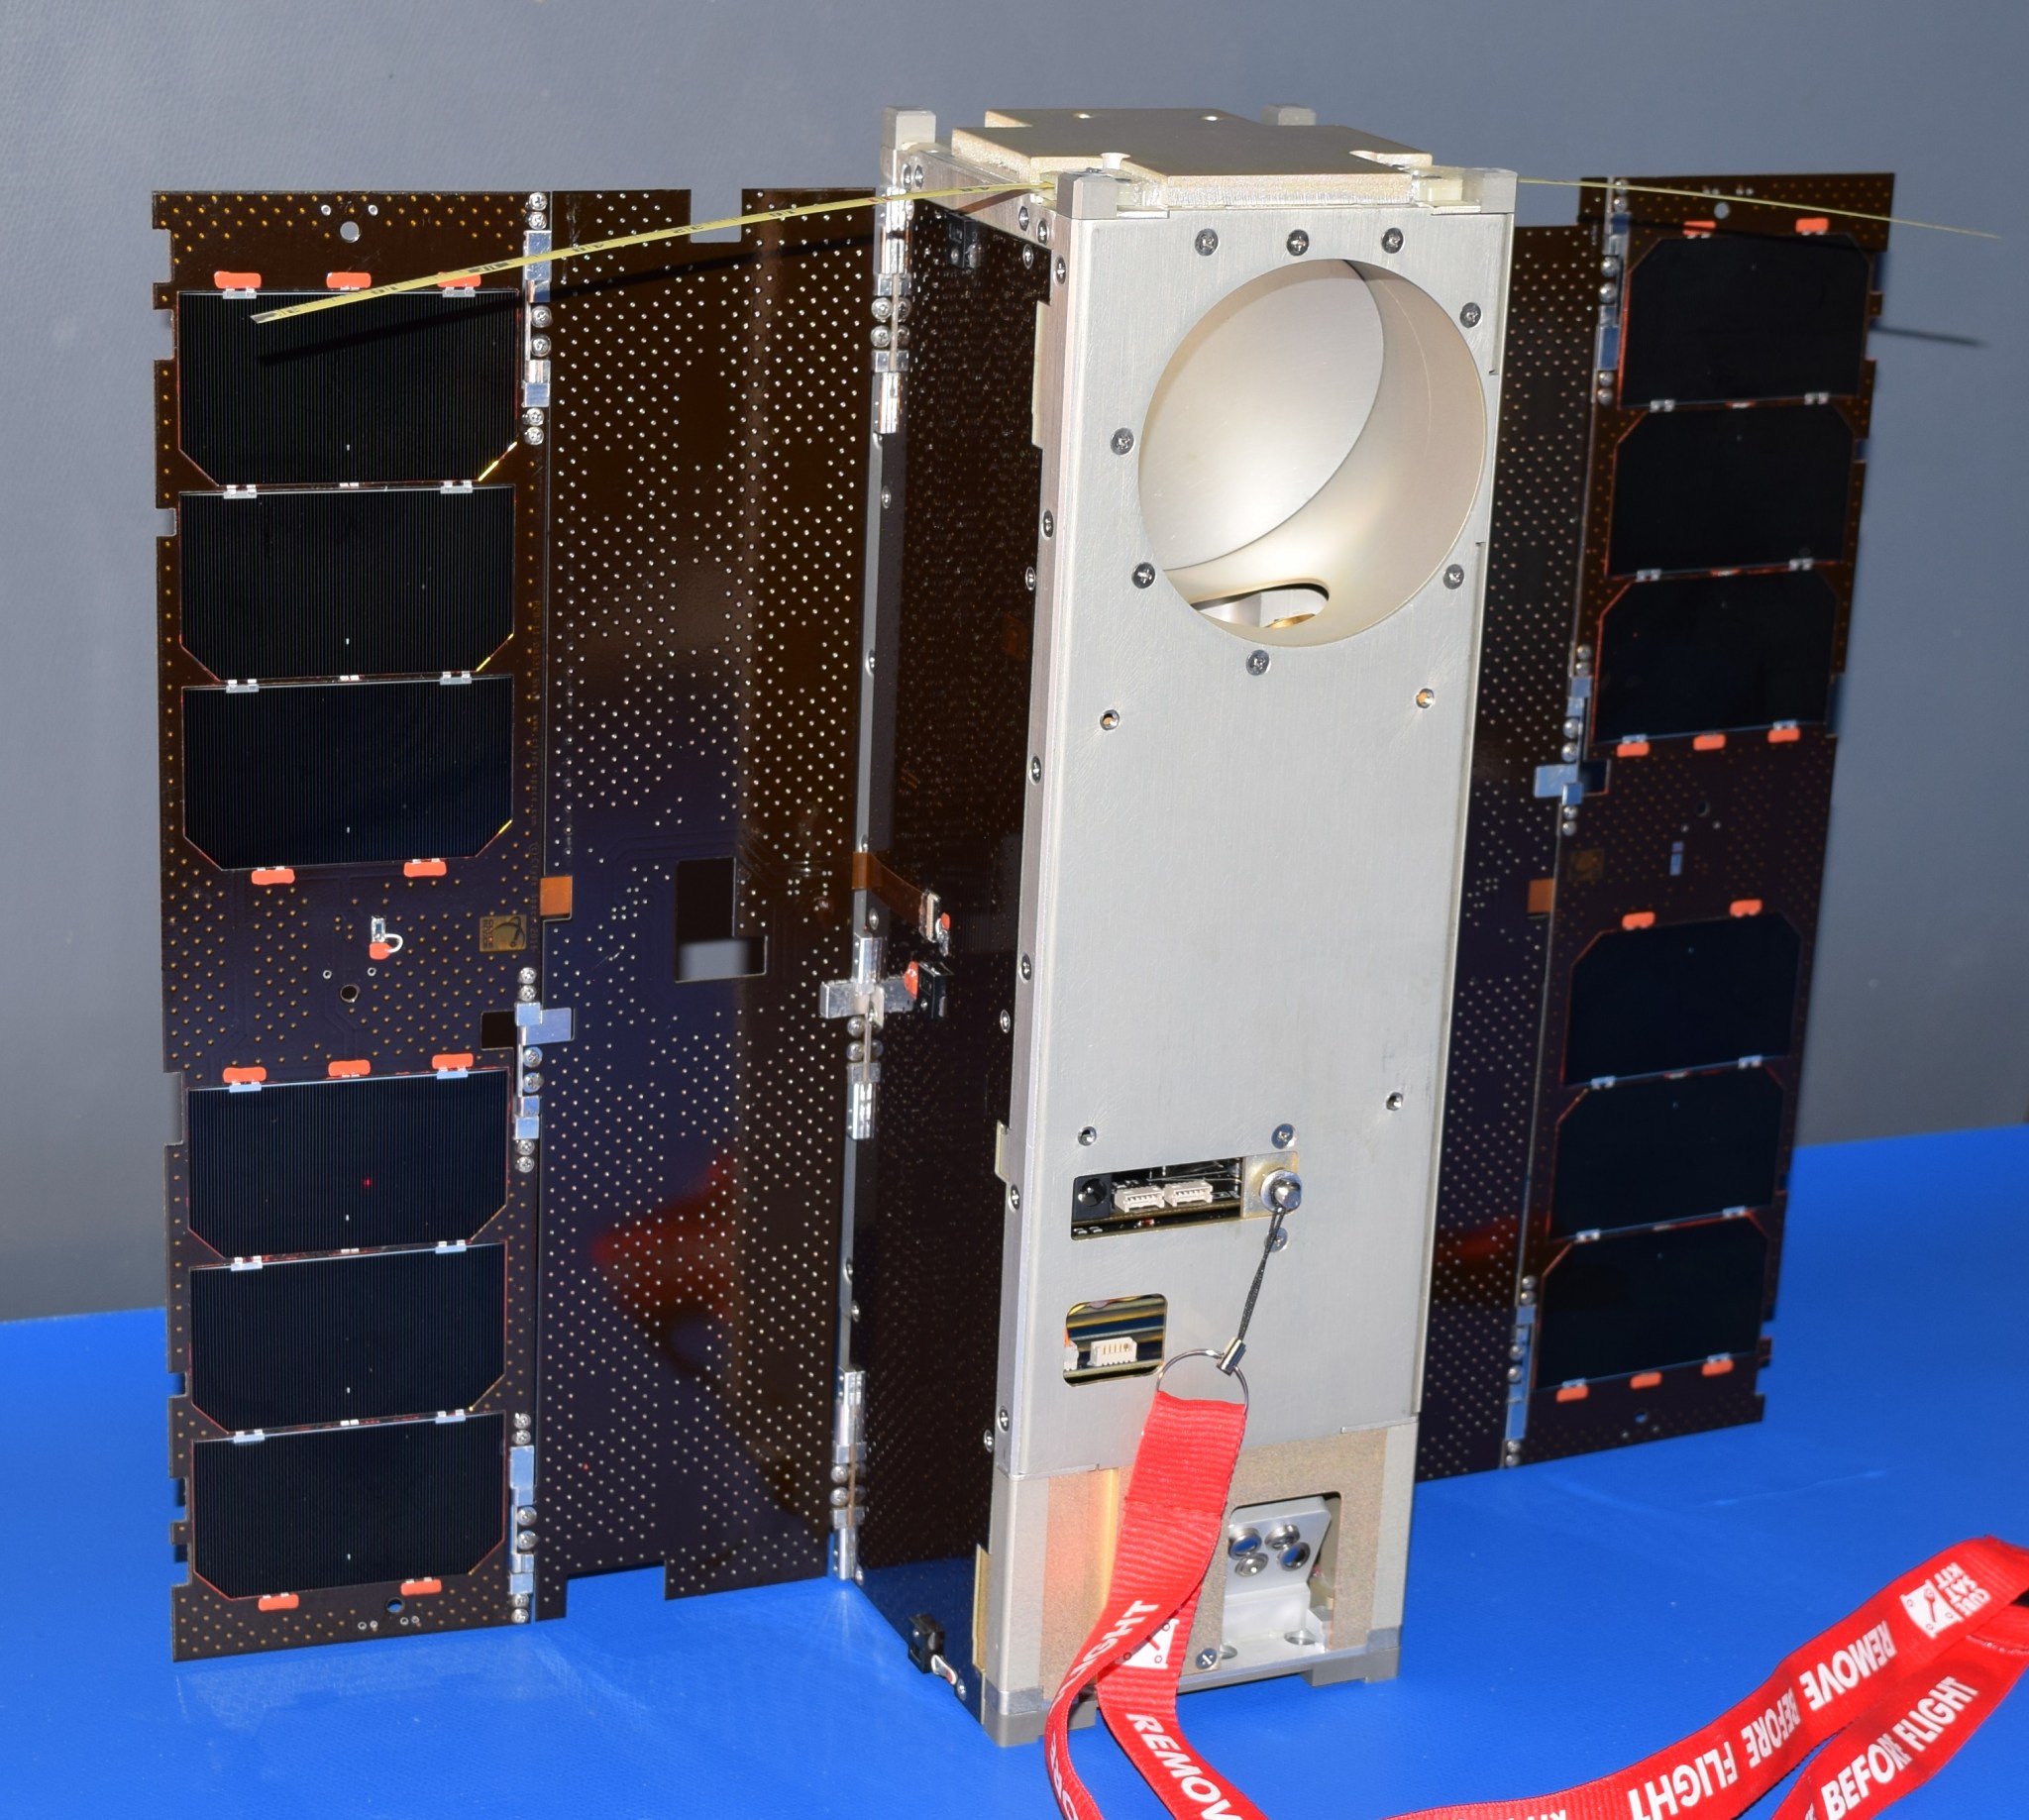 A small satellite sitting on a blue table. The satellite is a long, thin rectangular prism with a solar panel on either side like wings. A red lanyard that says "Remove Before Flight" is hooked to the belly of the satellite.